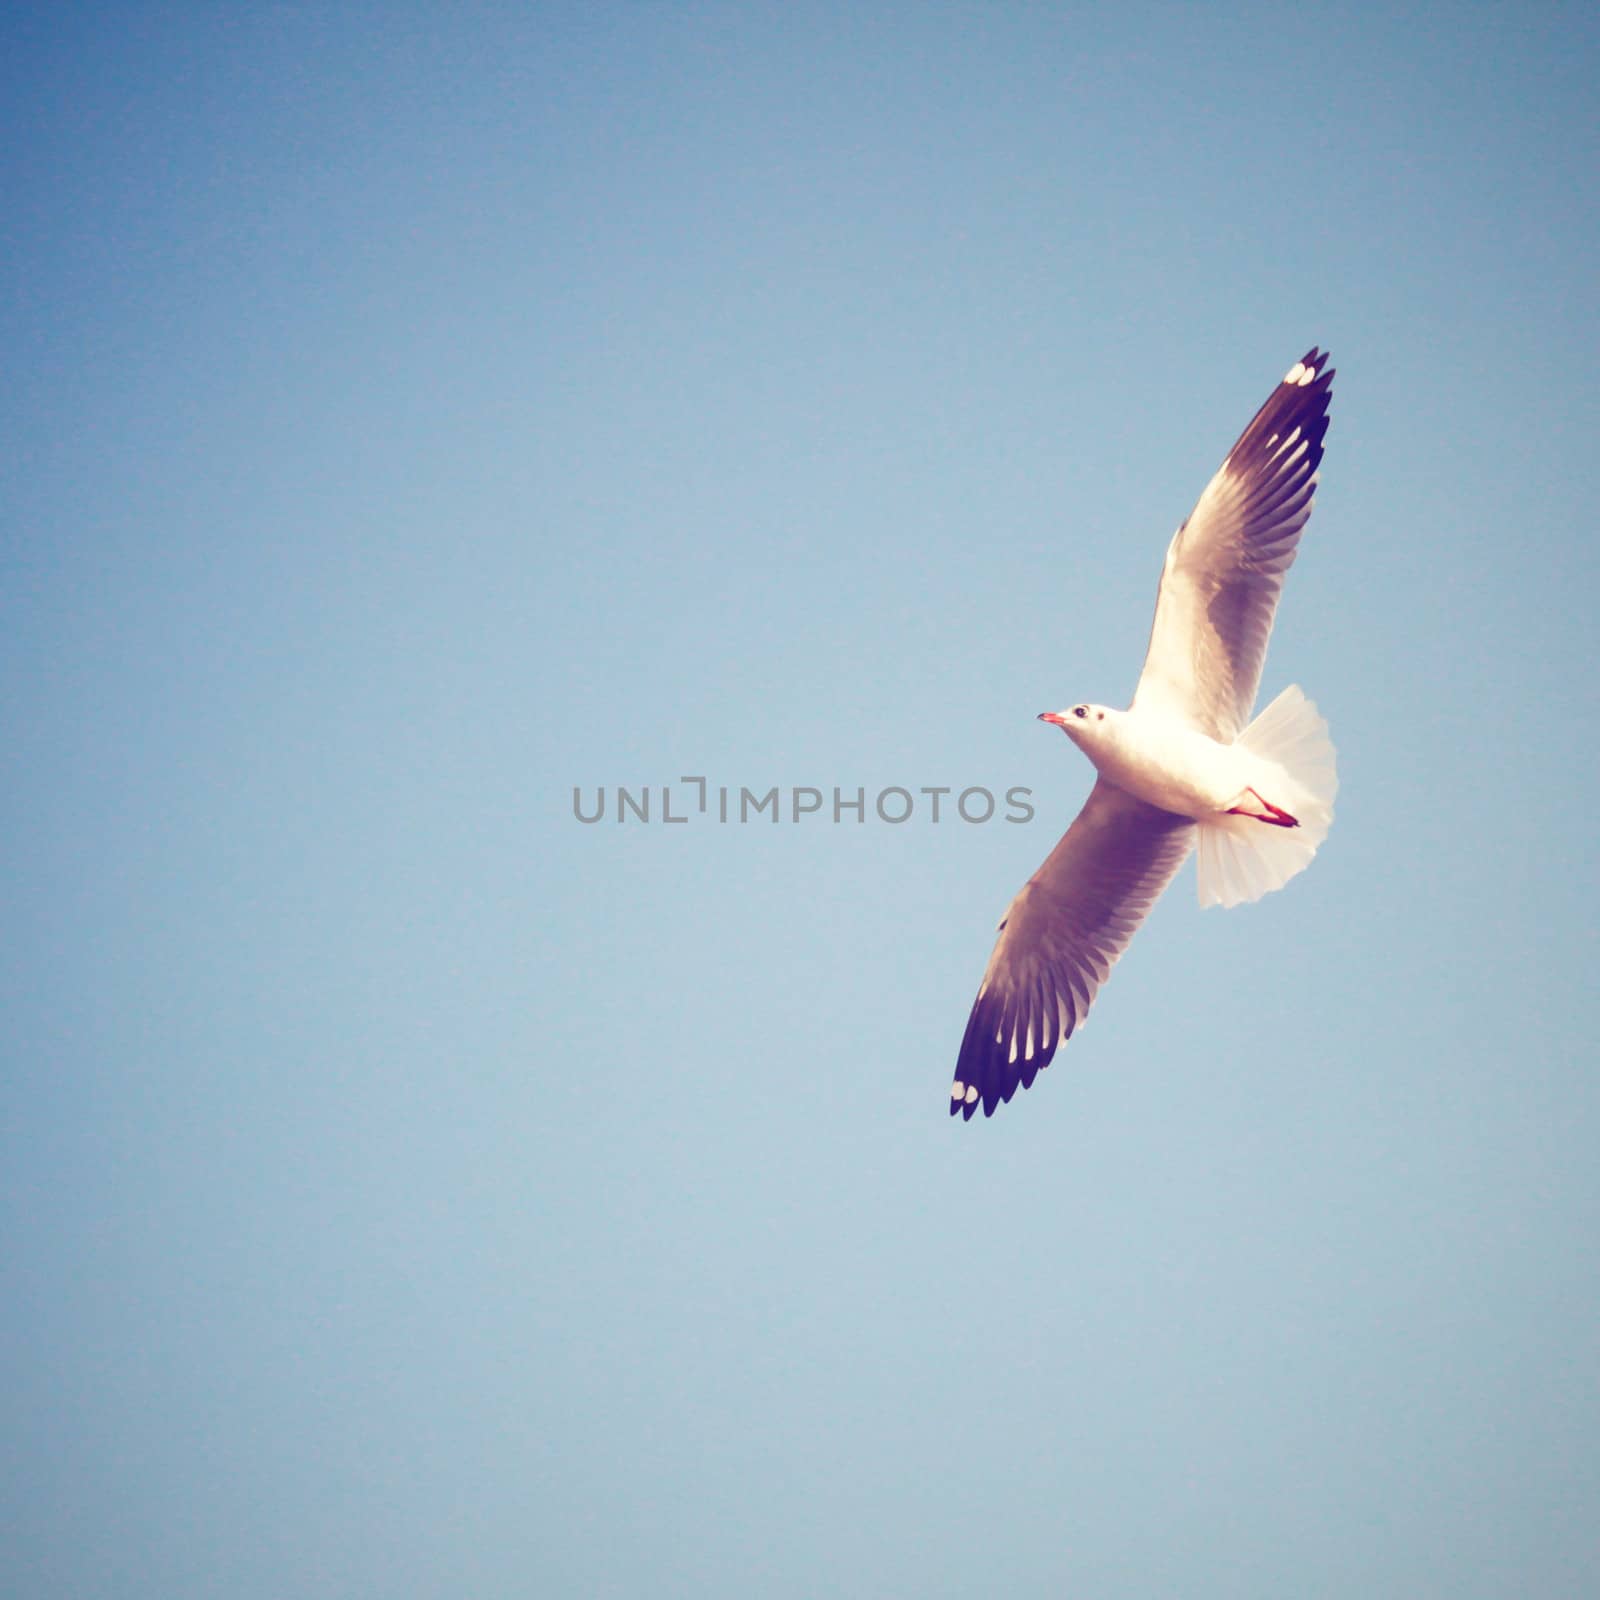 Seagull on blue sky with retro filter effect by nuchylee